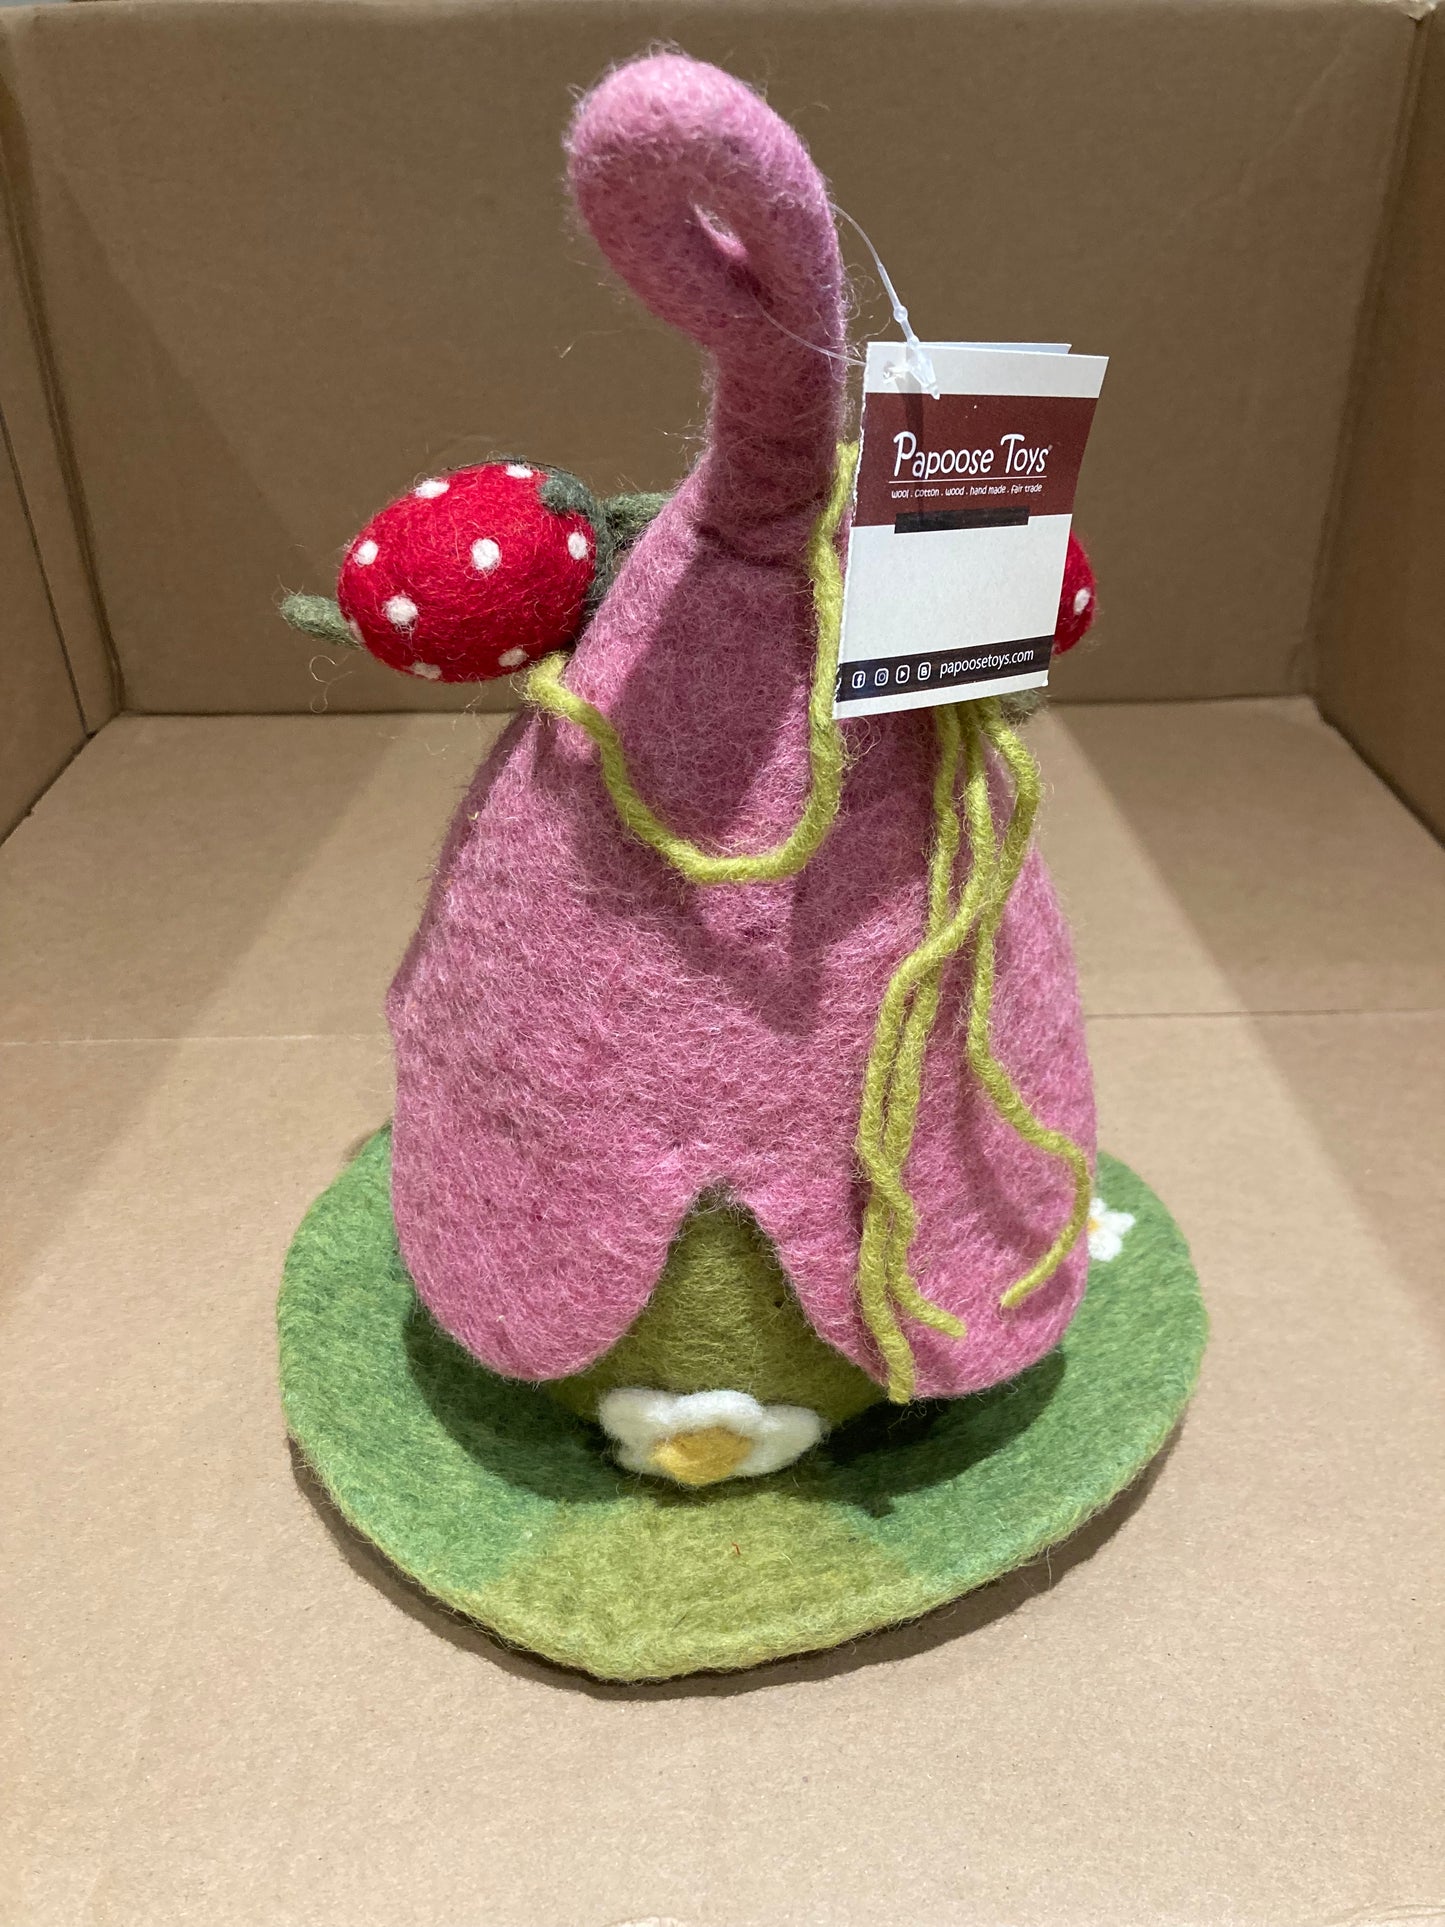 Dollhouse Play - FELTED STRAWBERRY HOUSE